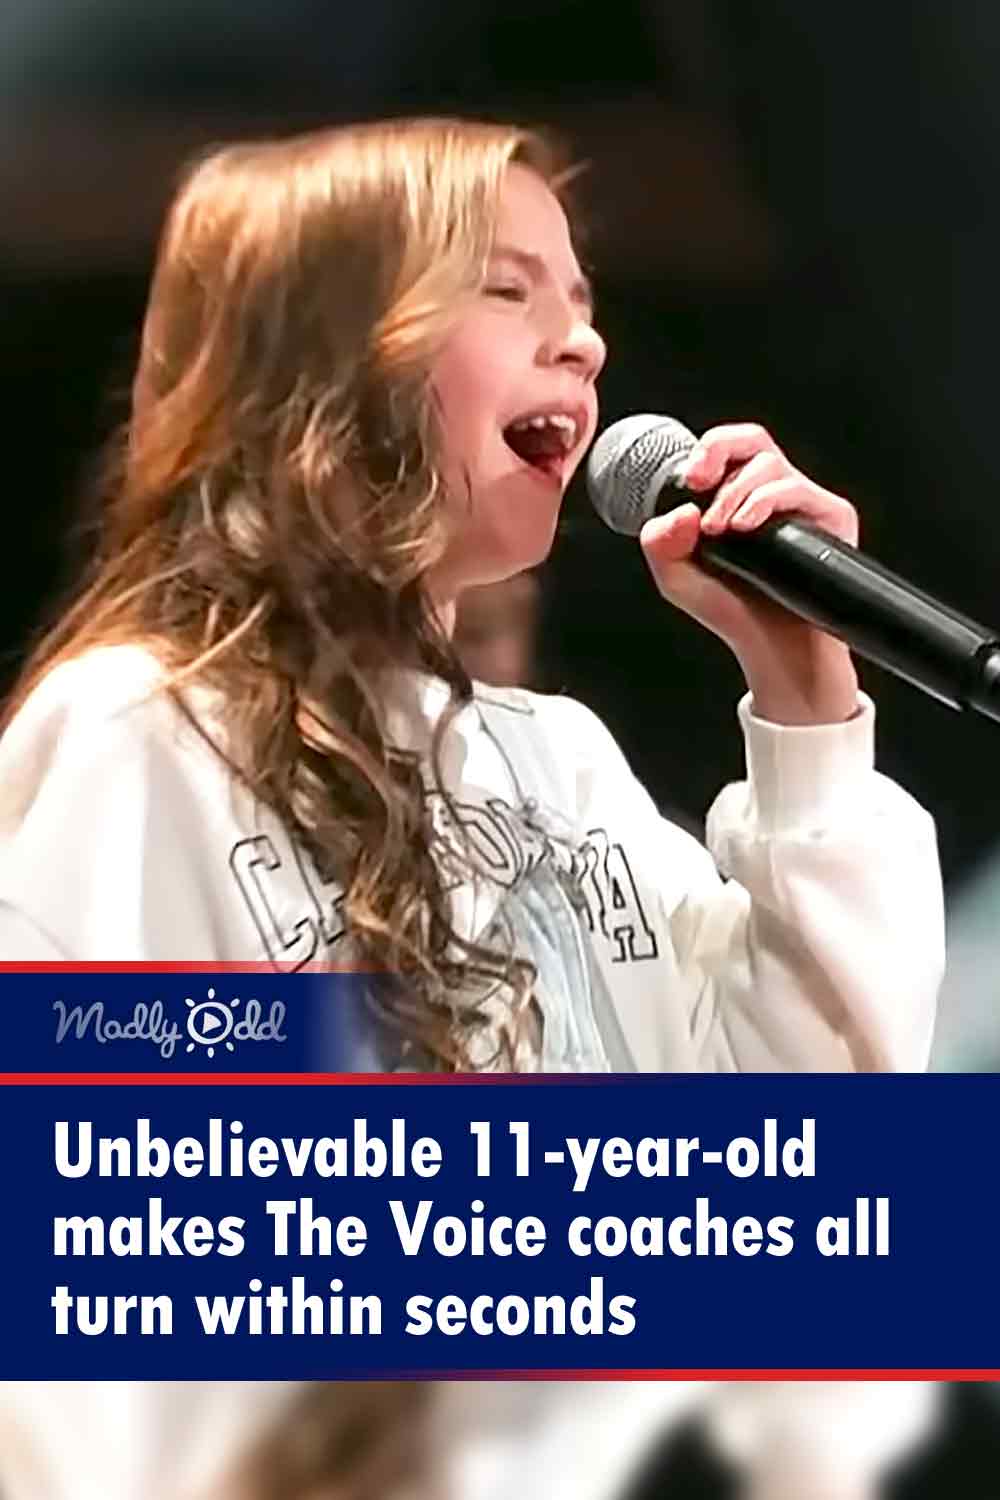 Unbelievable 11-year-old makes The Voice coaches all turn within seconds